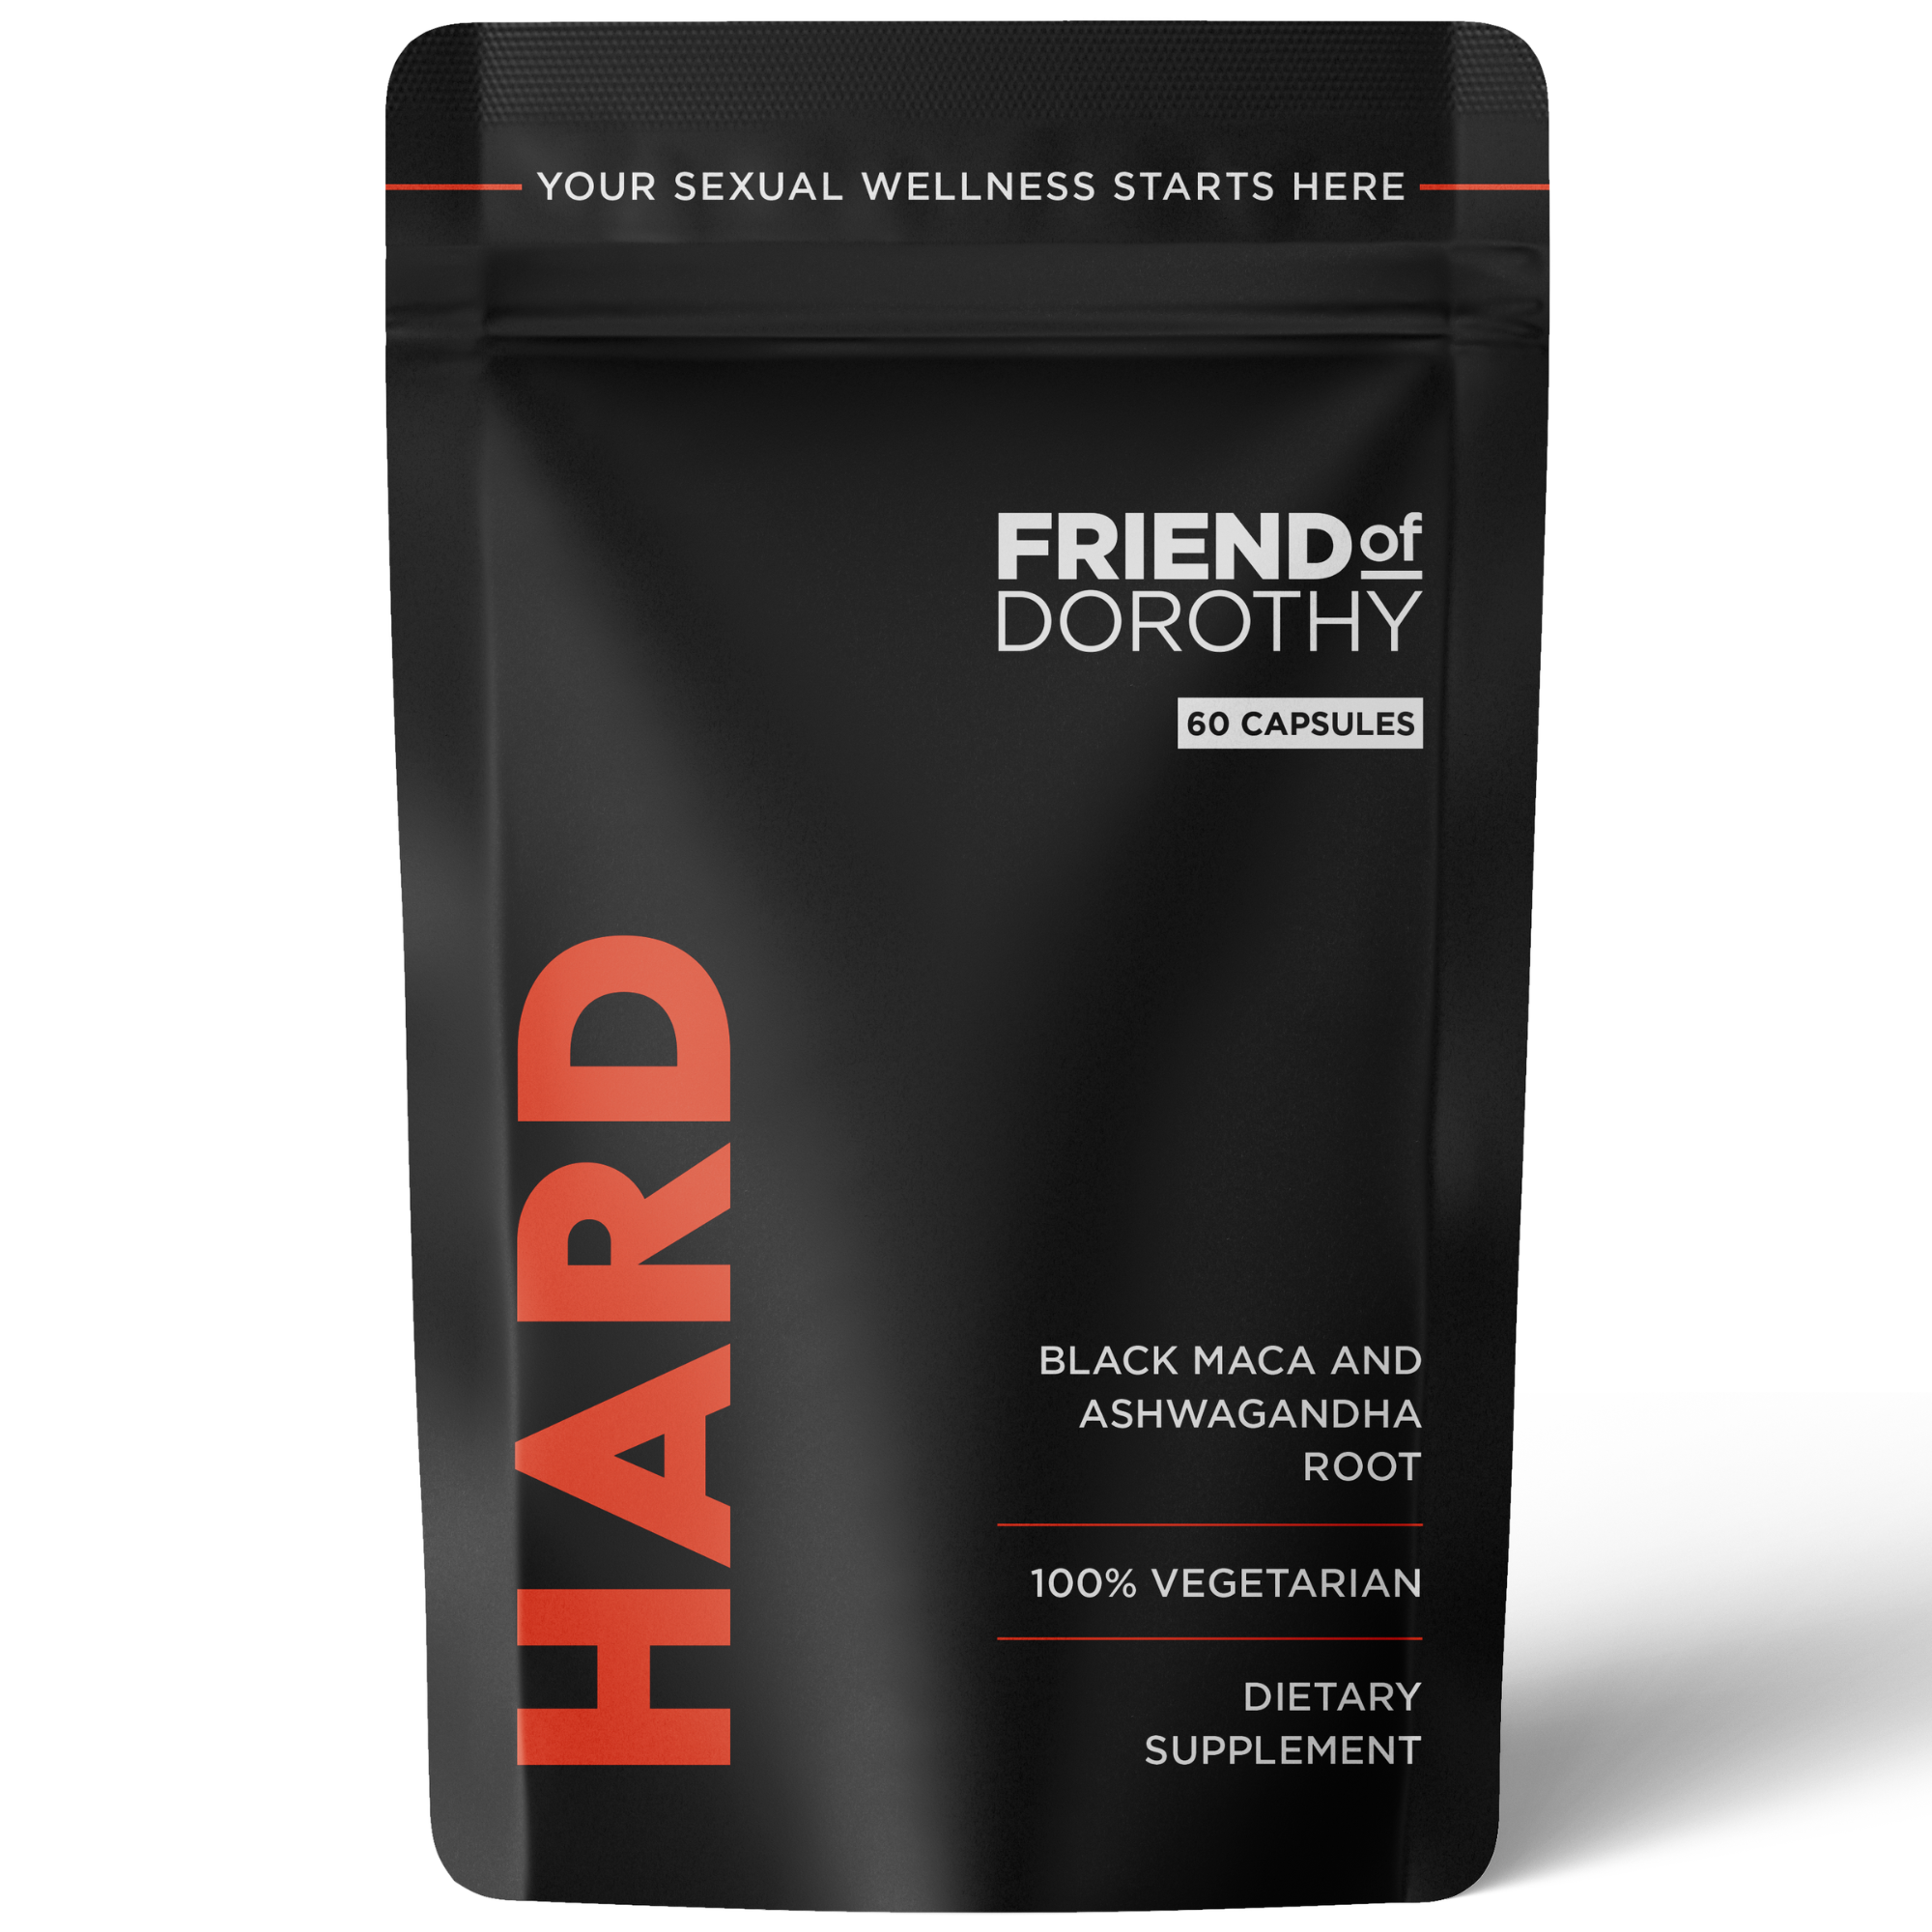 HARD - boost your libido, get hard & stay hard (Subscribe and save 10%) (1 month supply)